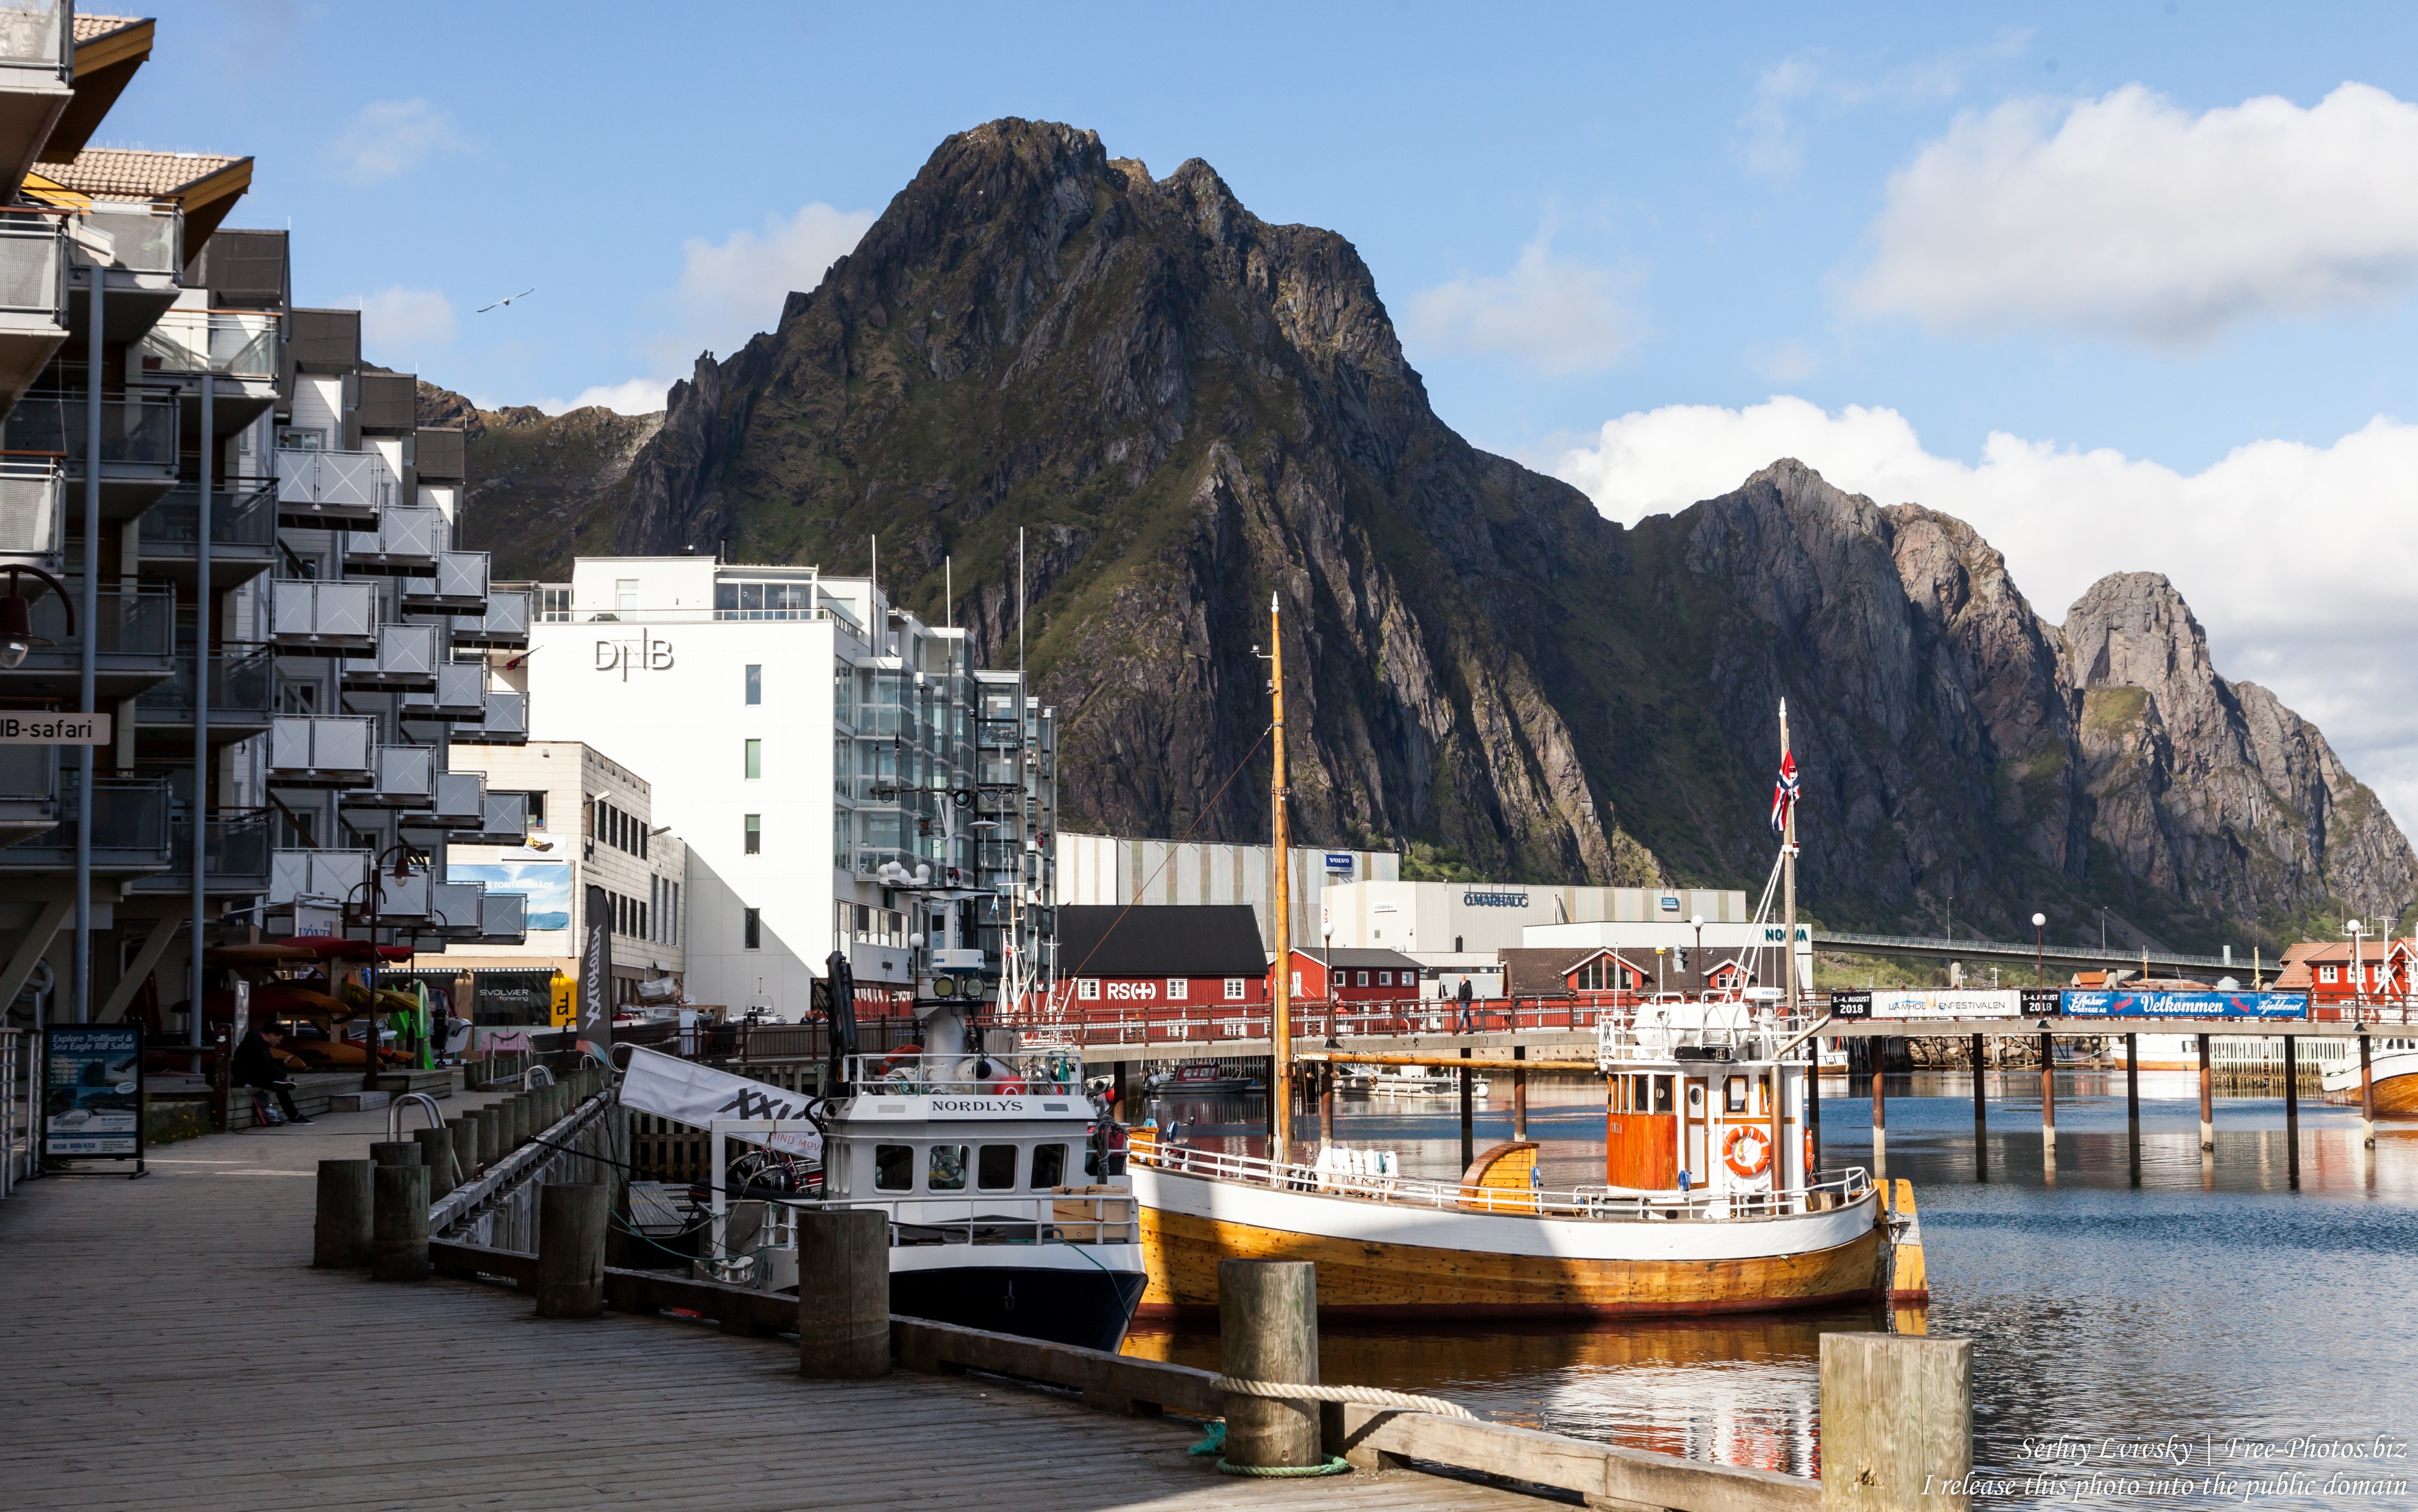 Svolvaer, Lofoten, Norway photographed in June 2018 by Serhiy Lvivsky, picture 14